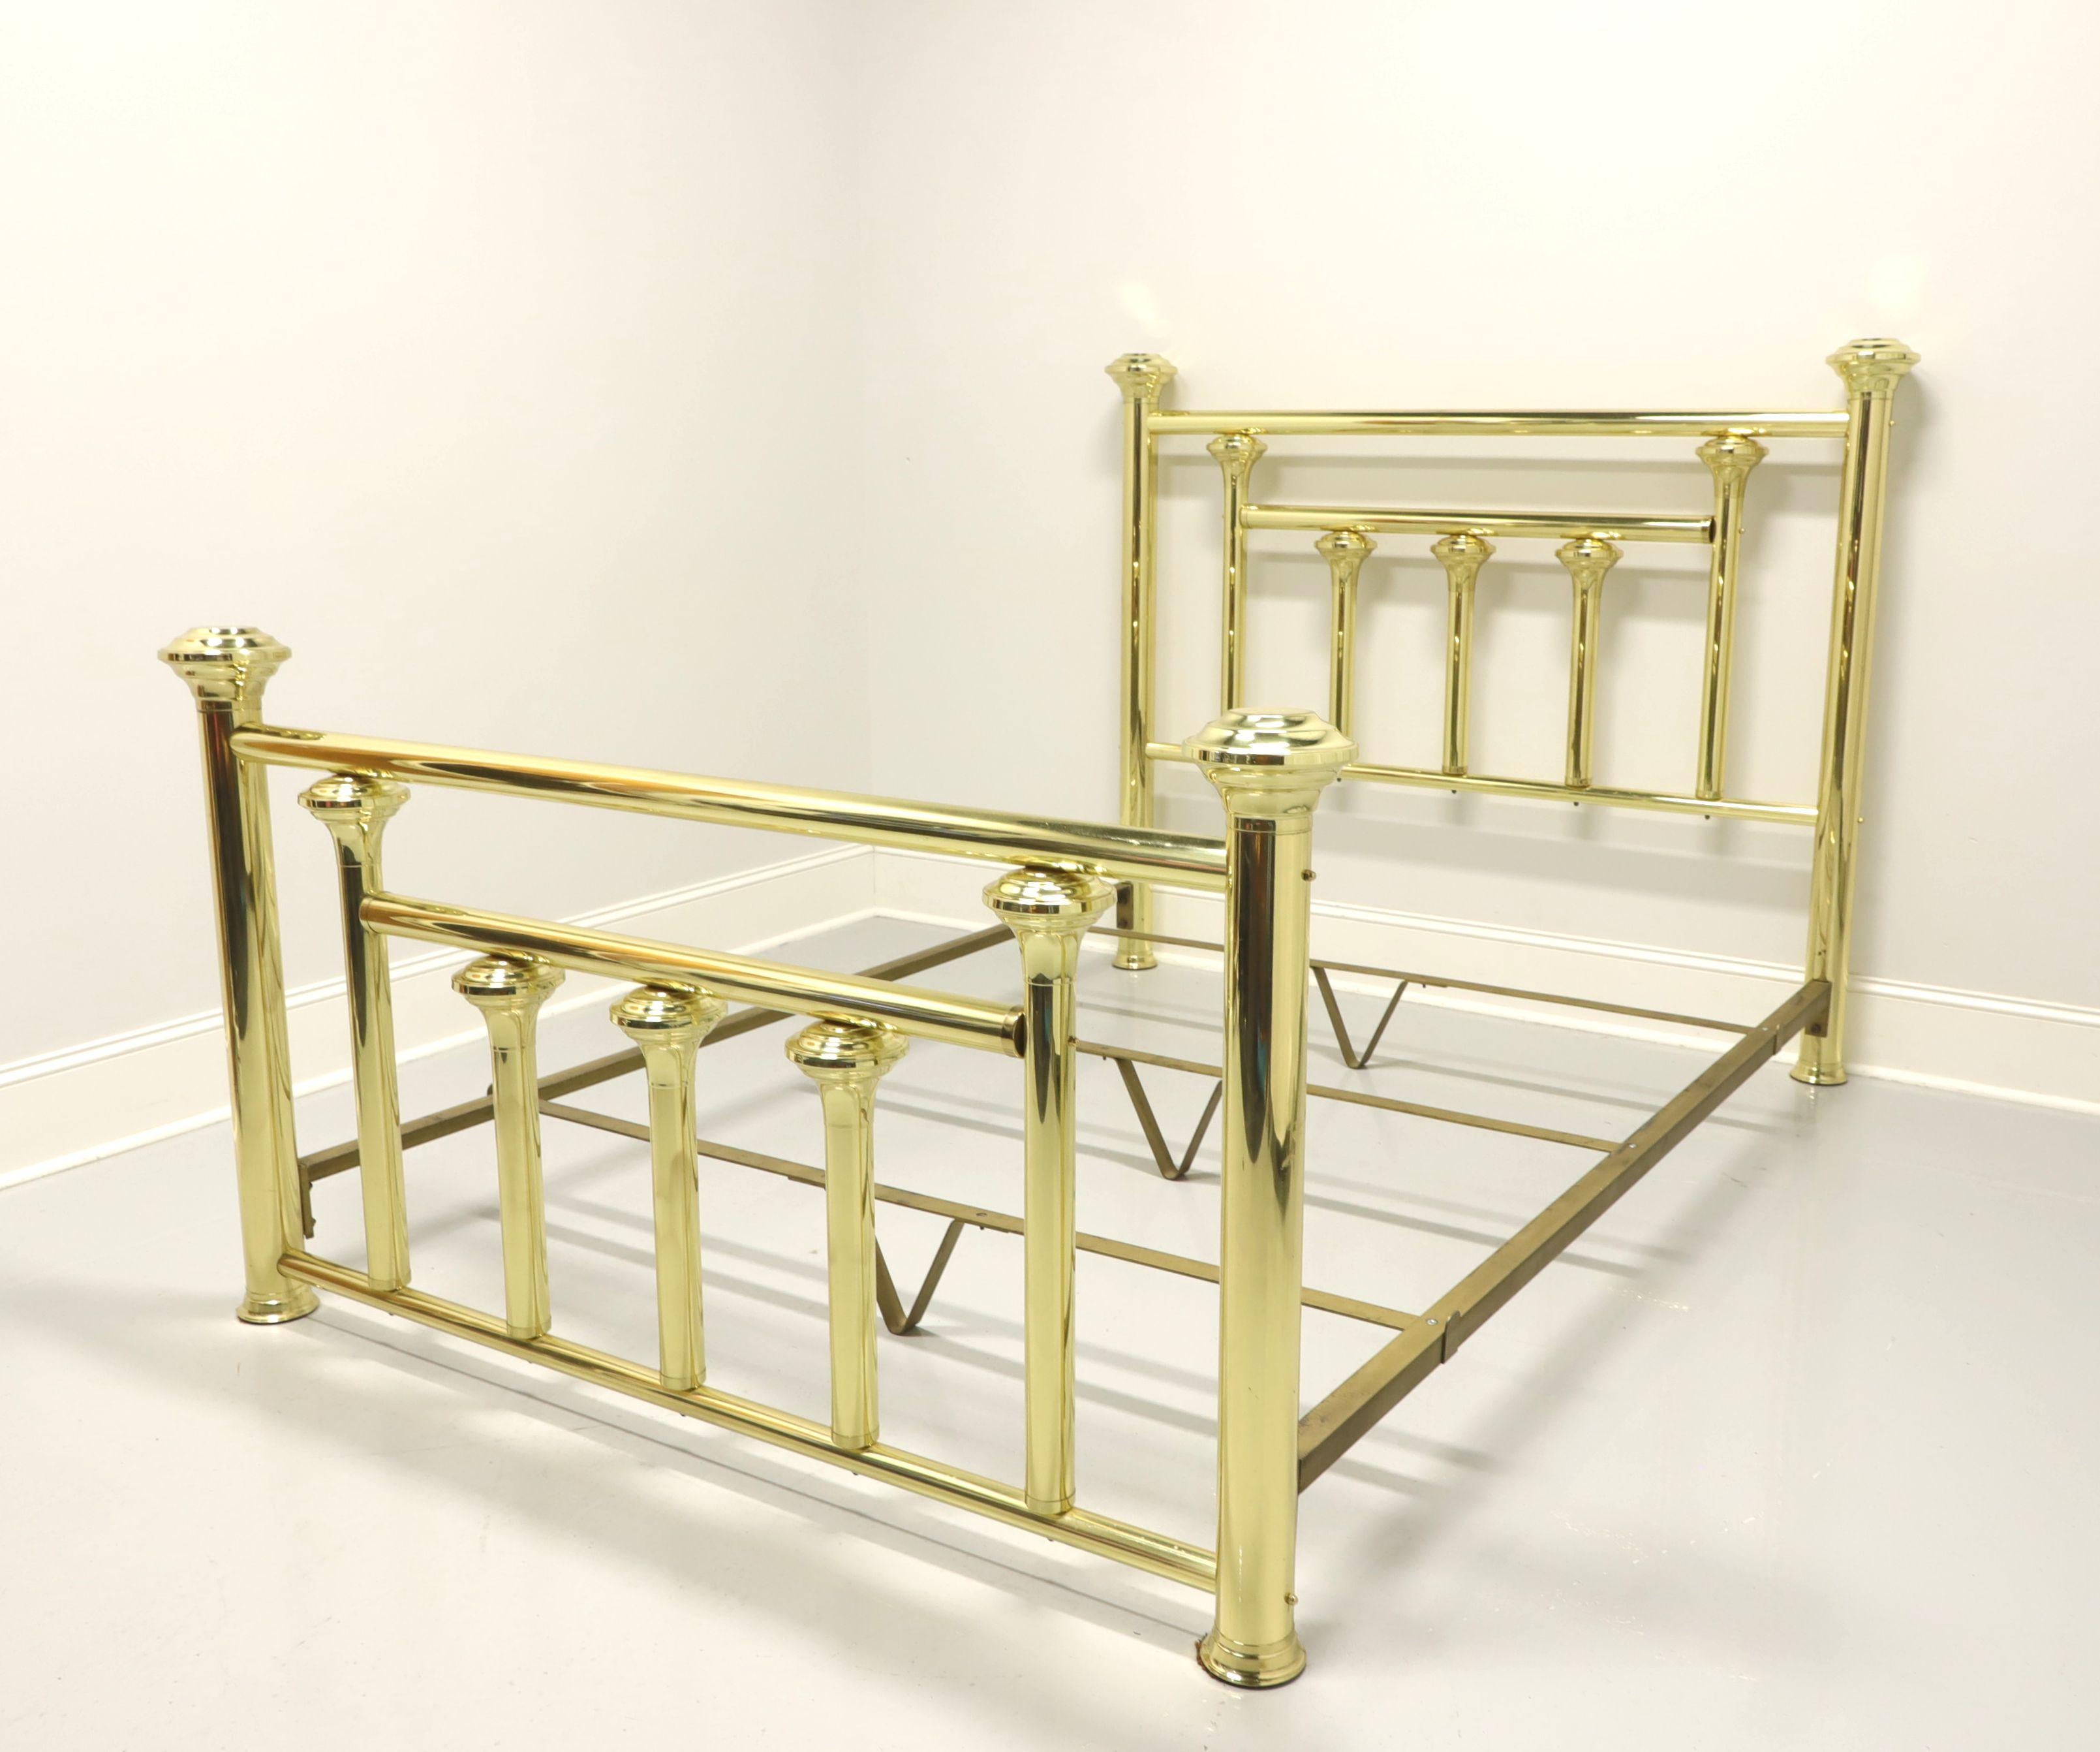 WESLEY ALLEN Legacy Collection Tubular Brass Queen Size Bed 2